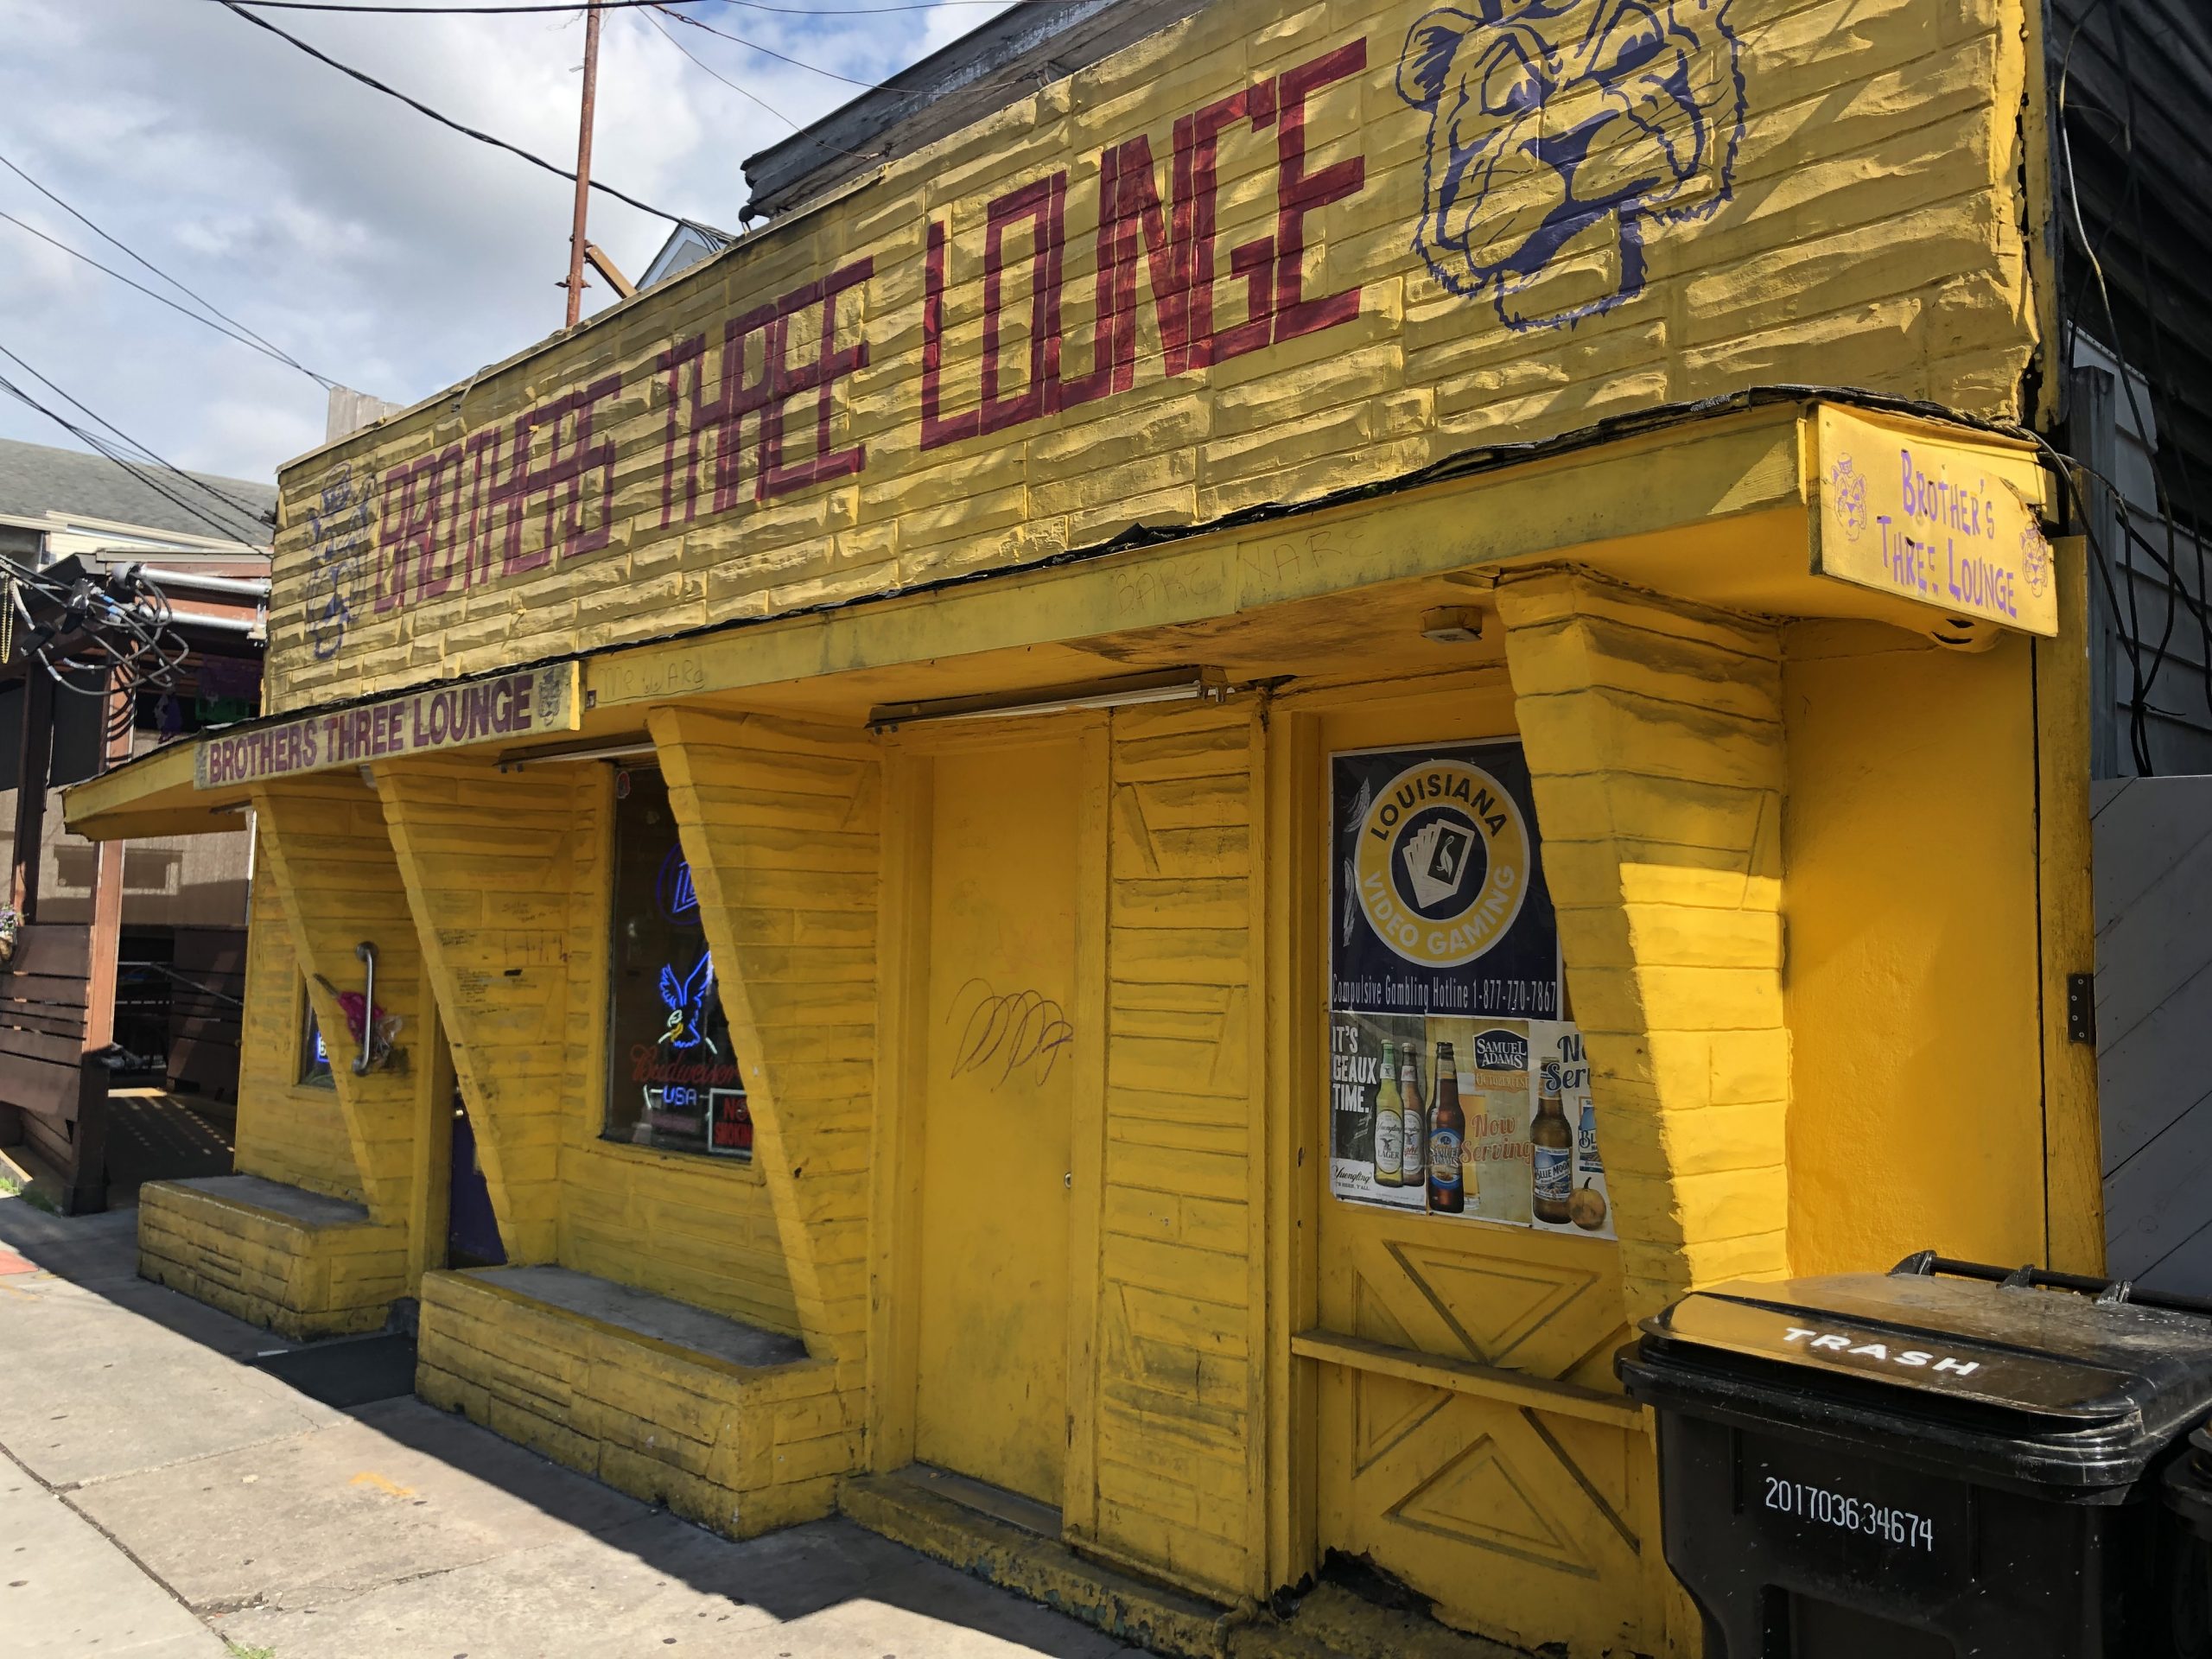 Brothers III Lounge - New Orleans Dive Bar - Exterior